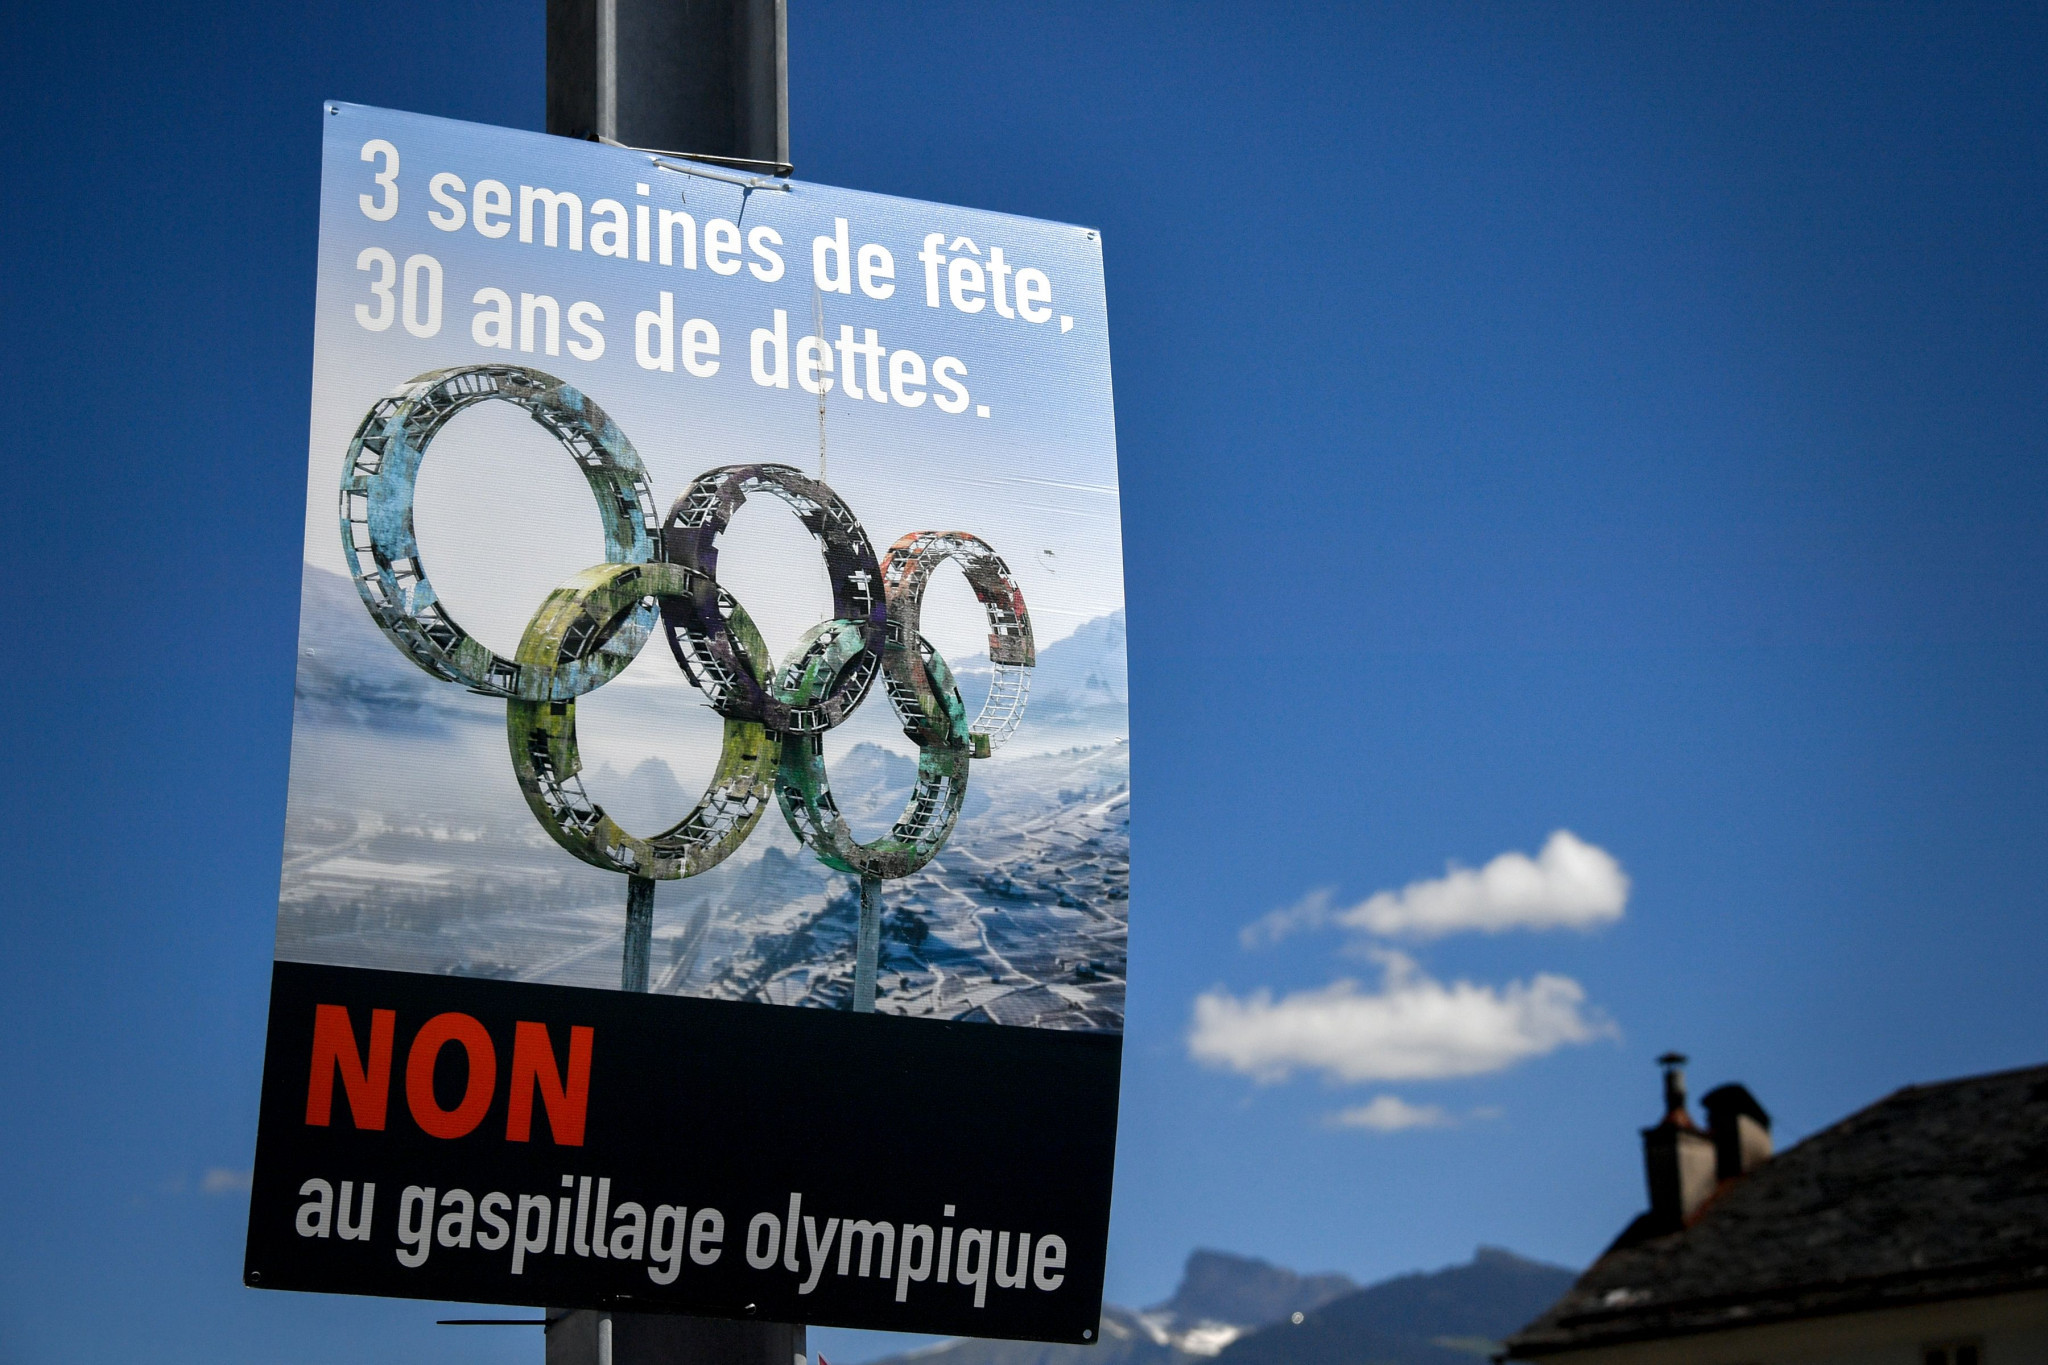 Disappointment has been expressed by several sports officials after Sion 2026 lost a crucial referendum ©Getty Images